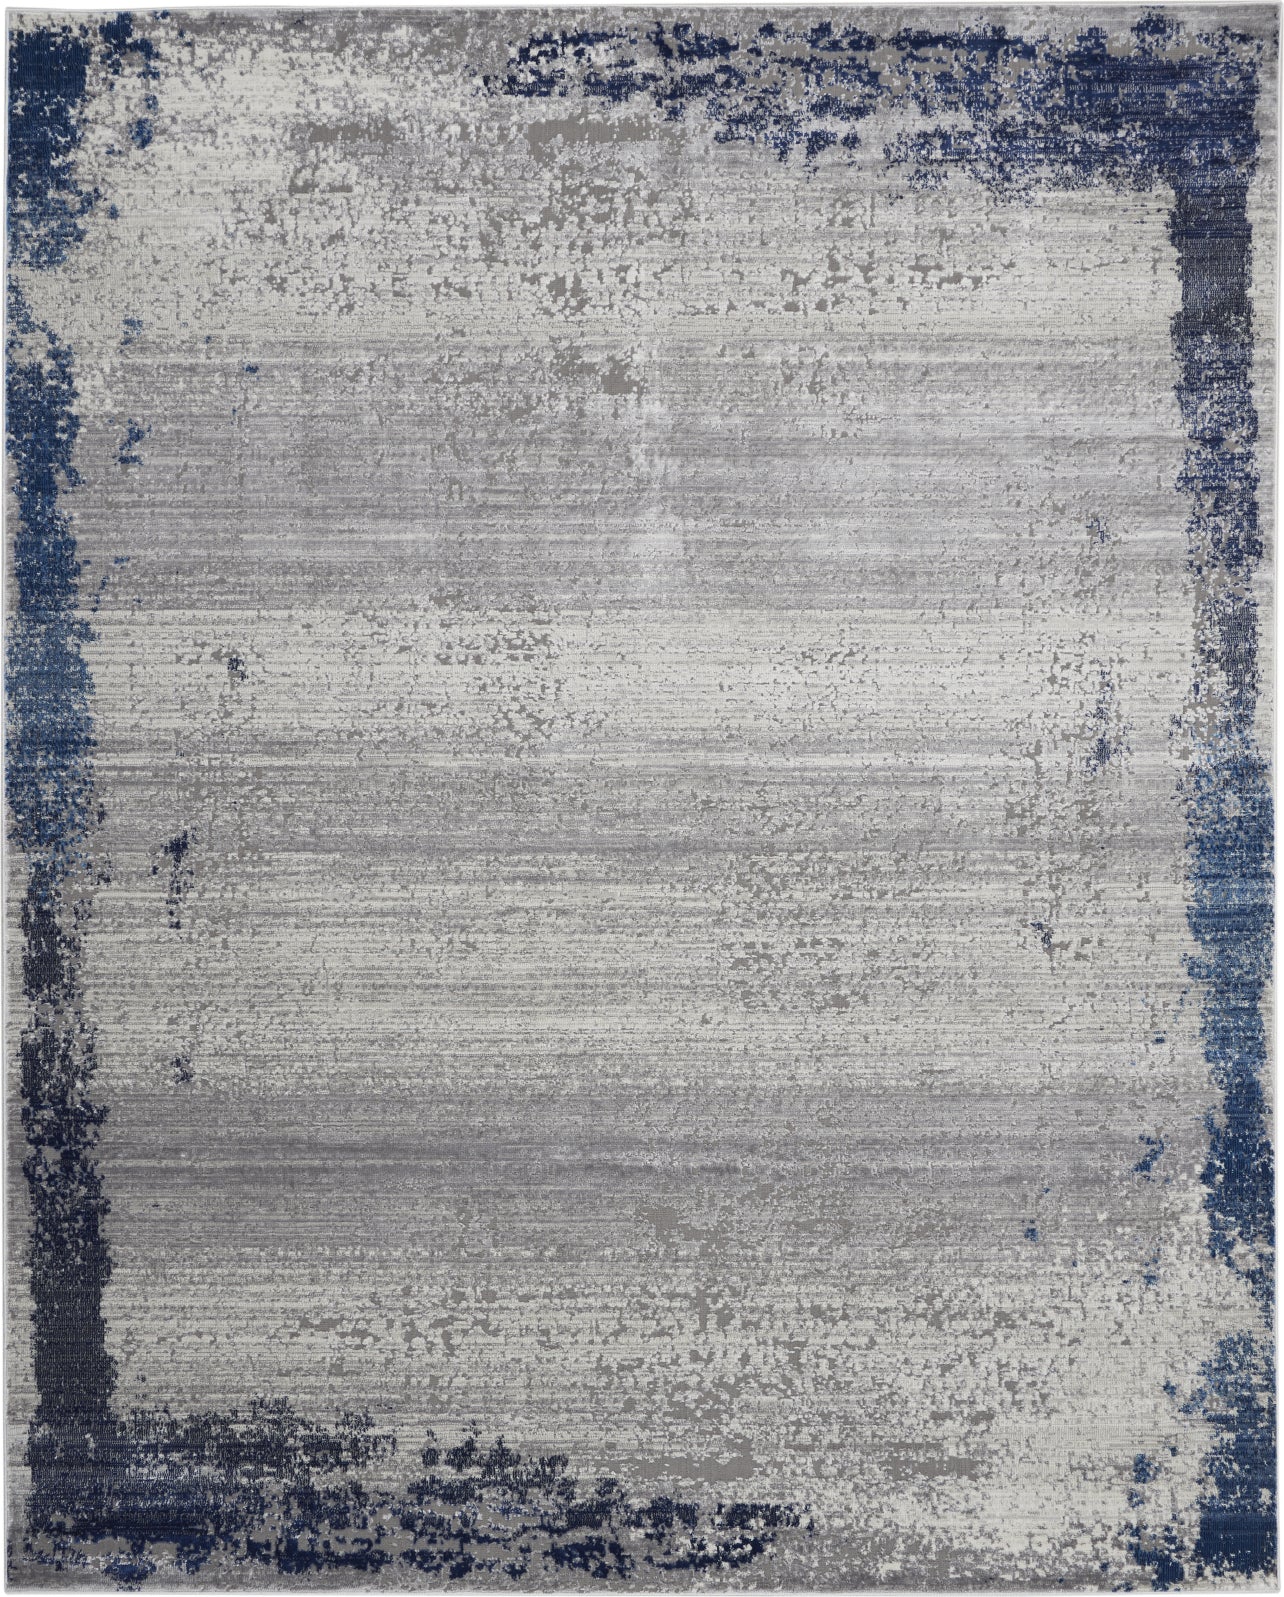 Imprints IMT01 Grey/Navy Area Rug by Nourison main image